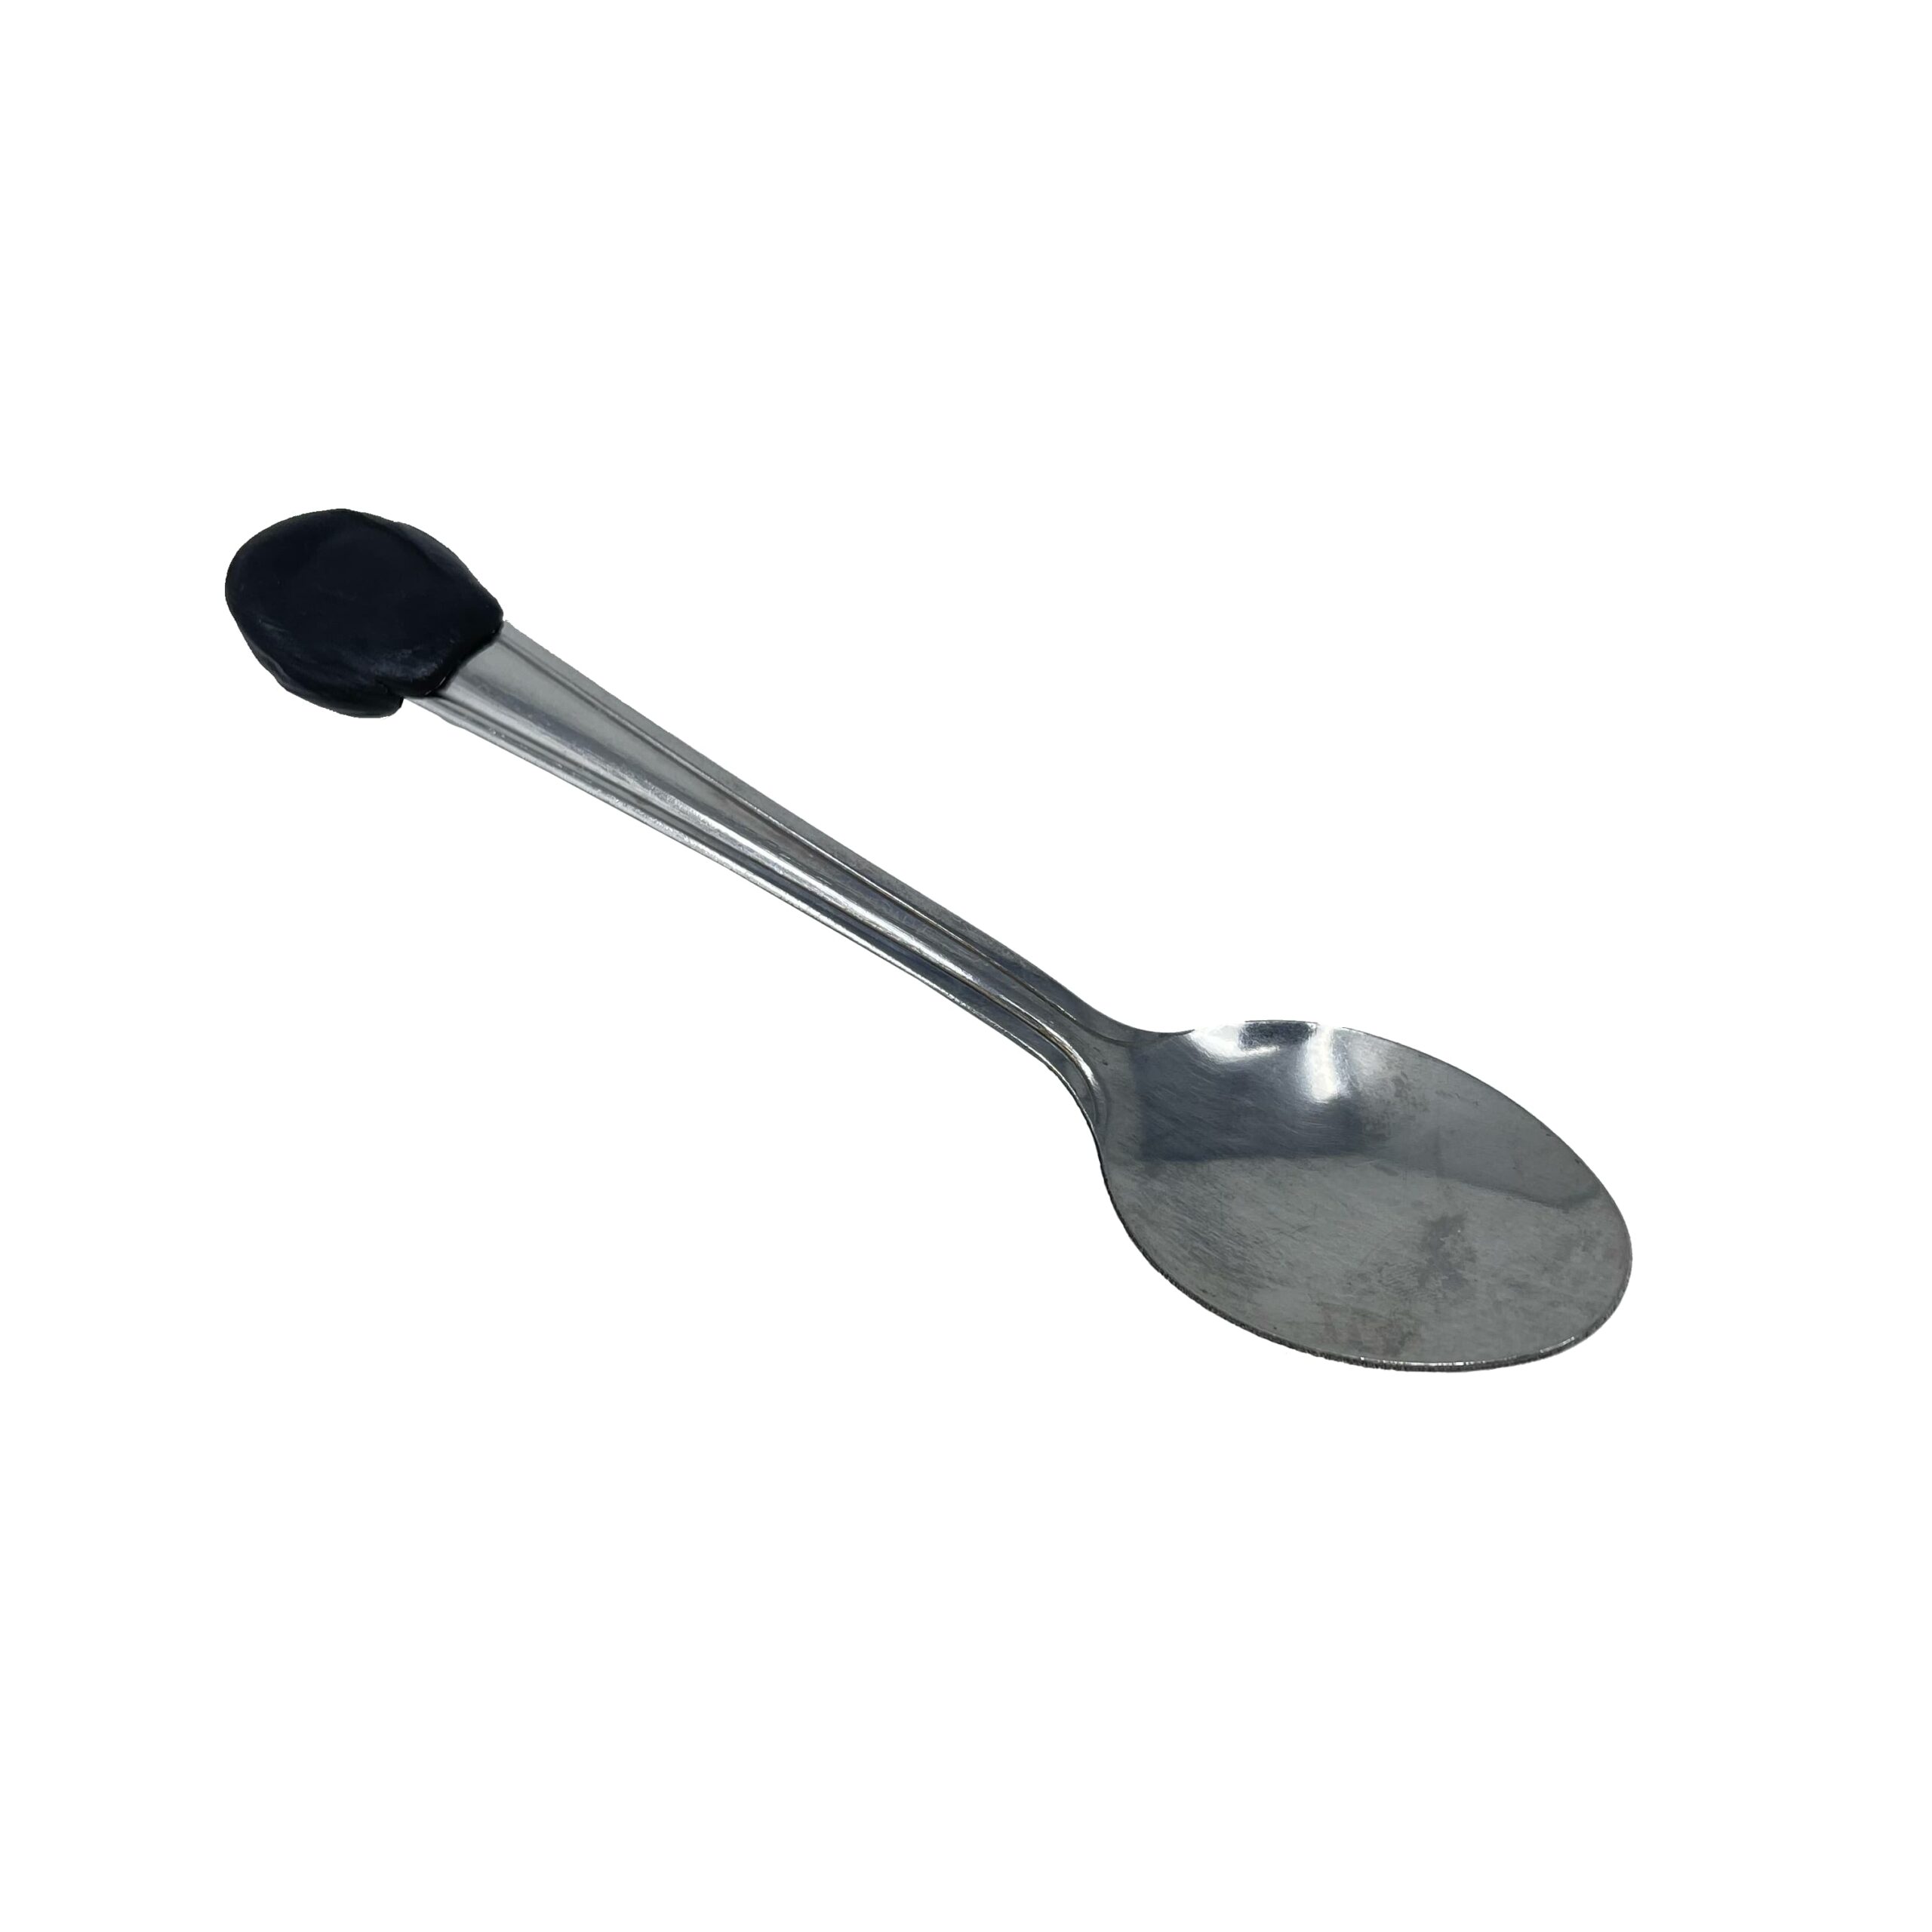 Adding extra blobs of plastic to a spoon can make it more usable